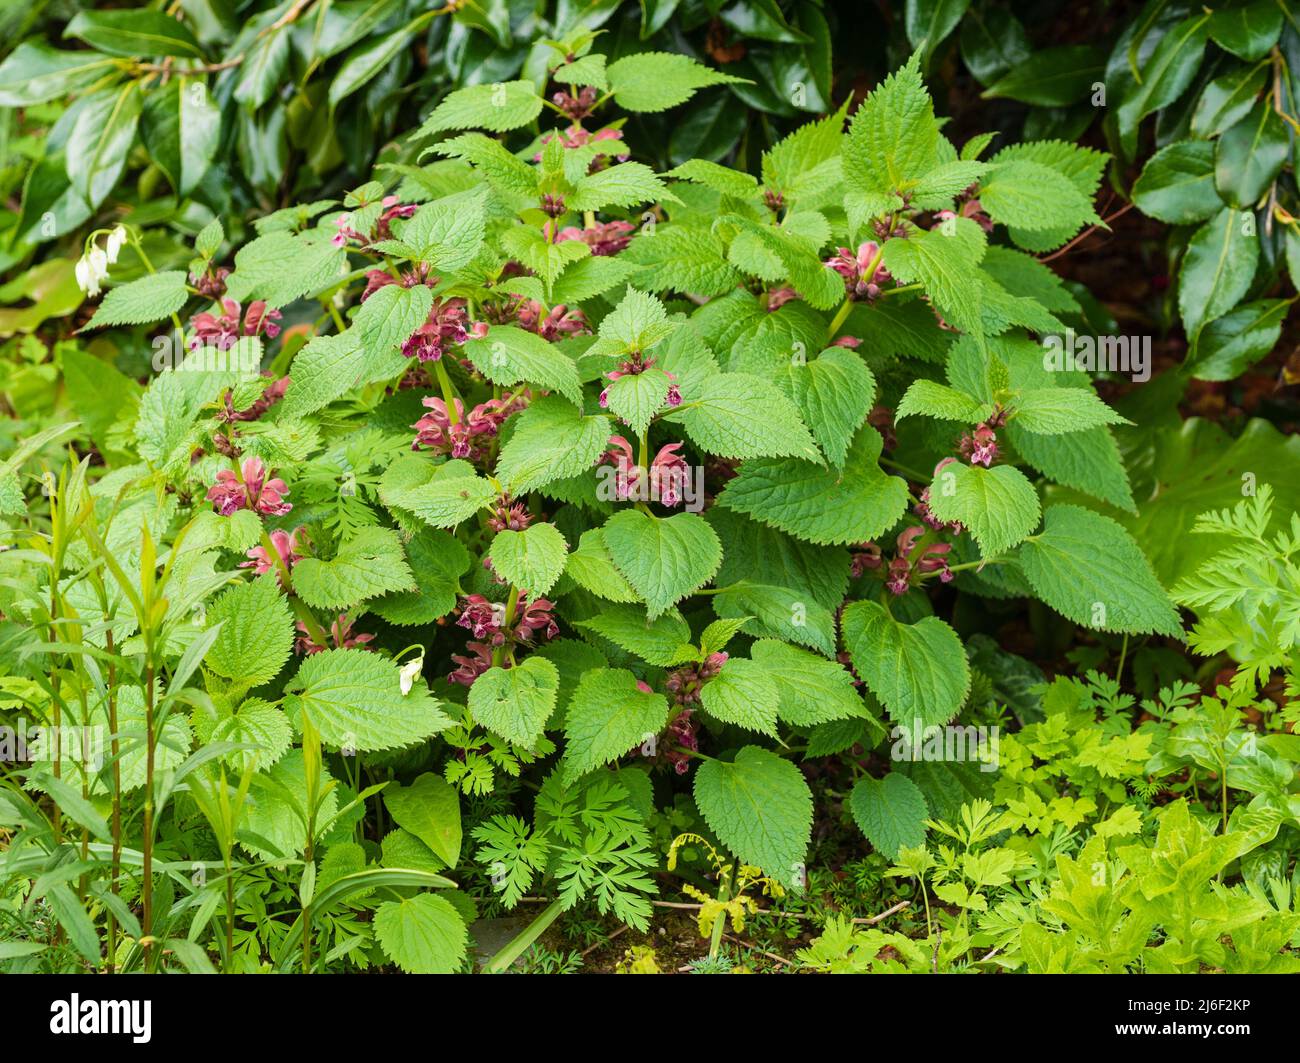 Clump of the spring flowering hardy perennial, Lamium orvala, an ornamental dead nettle Stock Photo